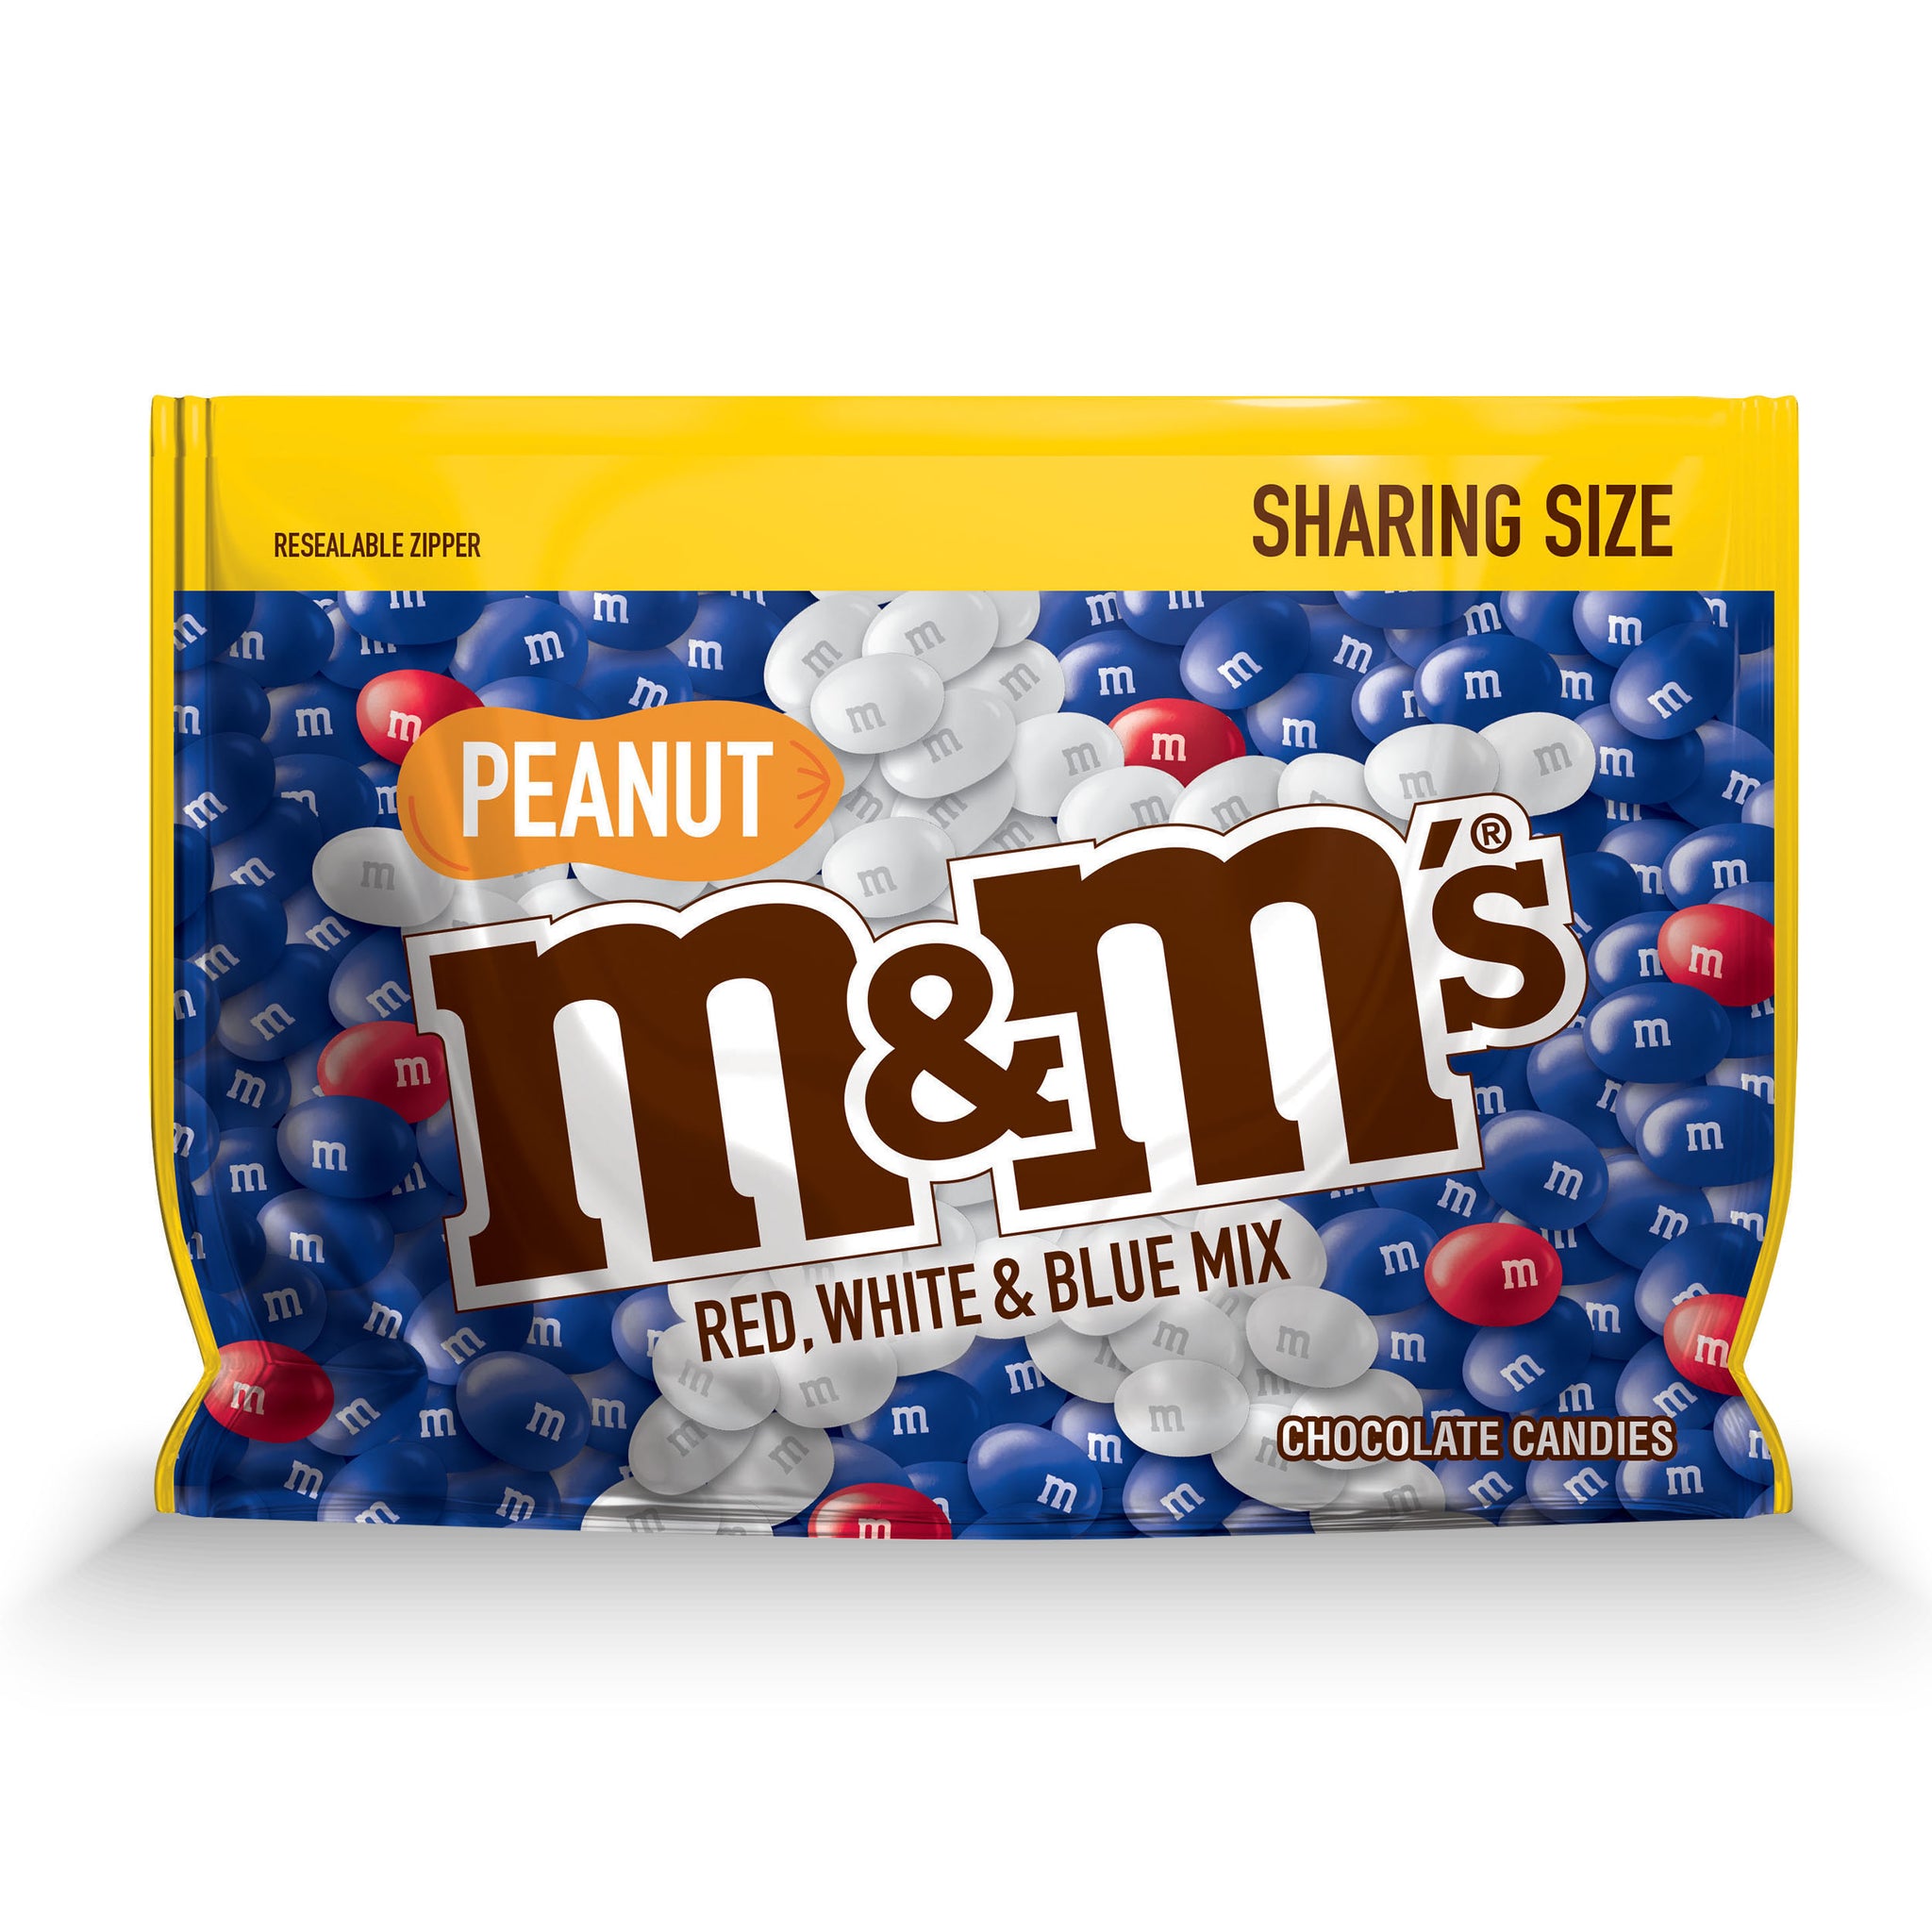 M&M's Milk Chocolate Red White & Blue Share Size